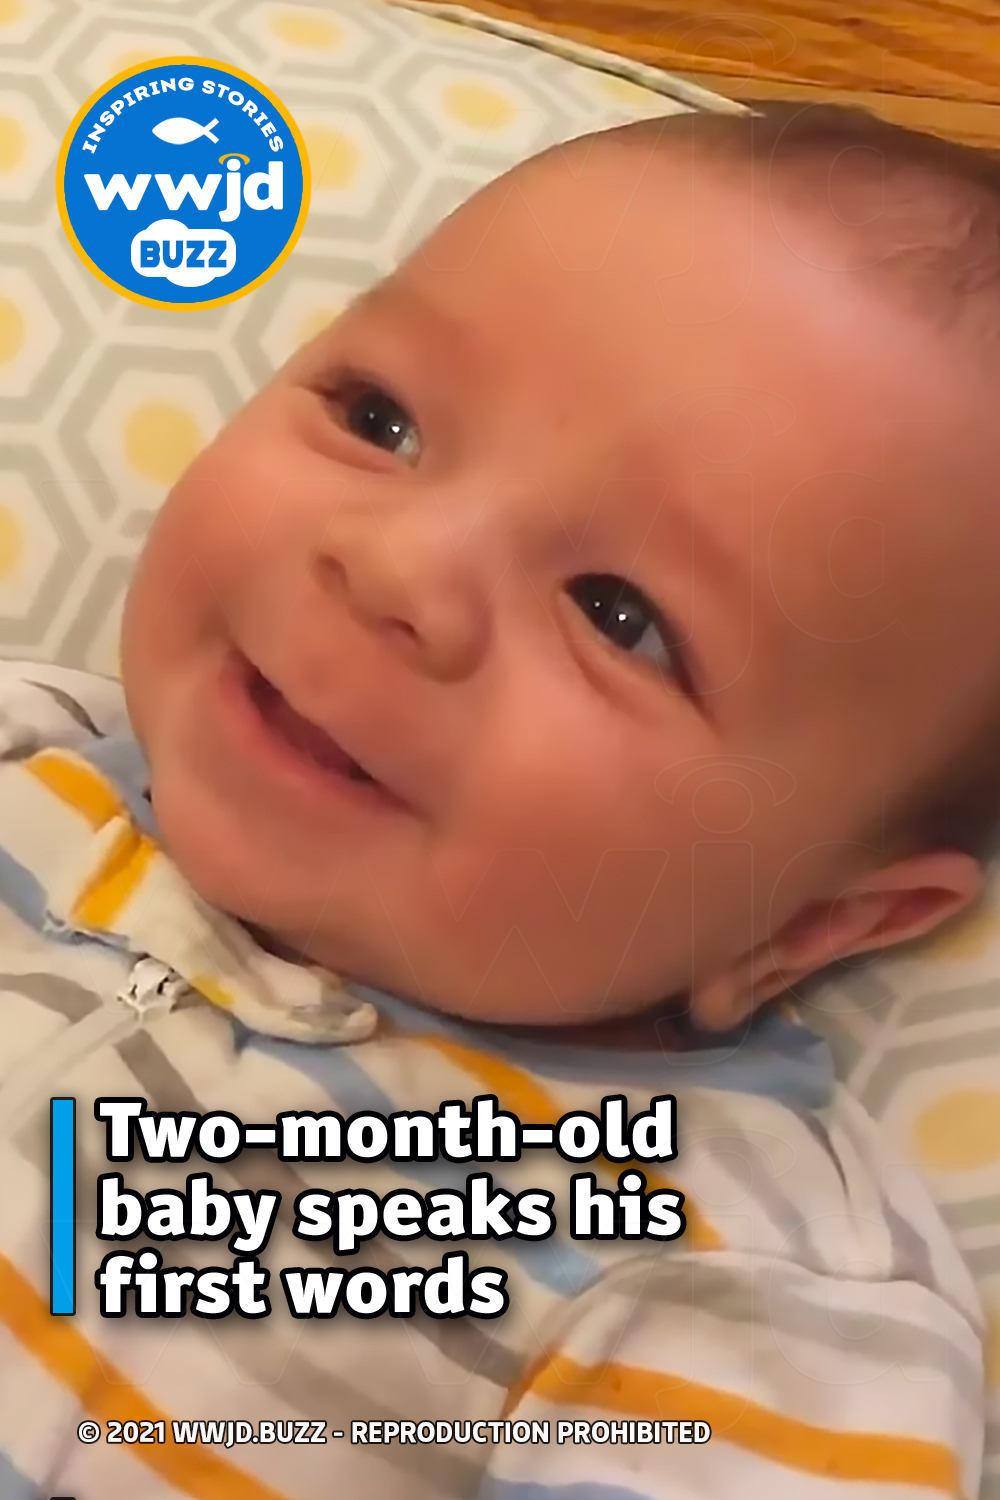 Two-month-old baby speaks his first words